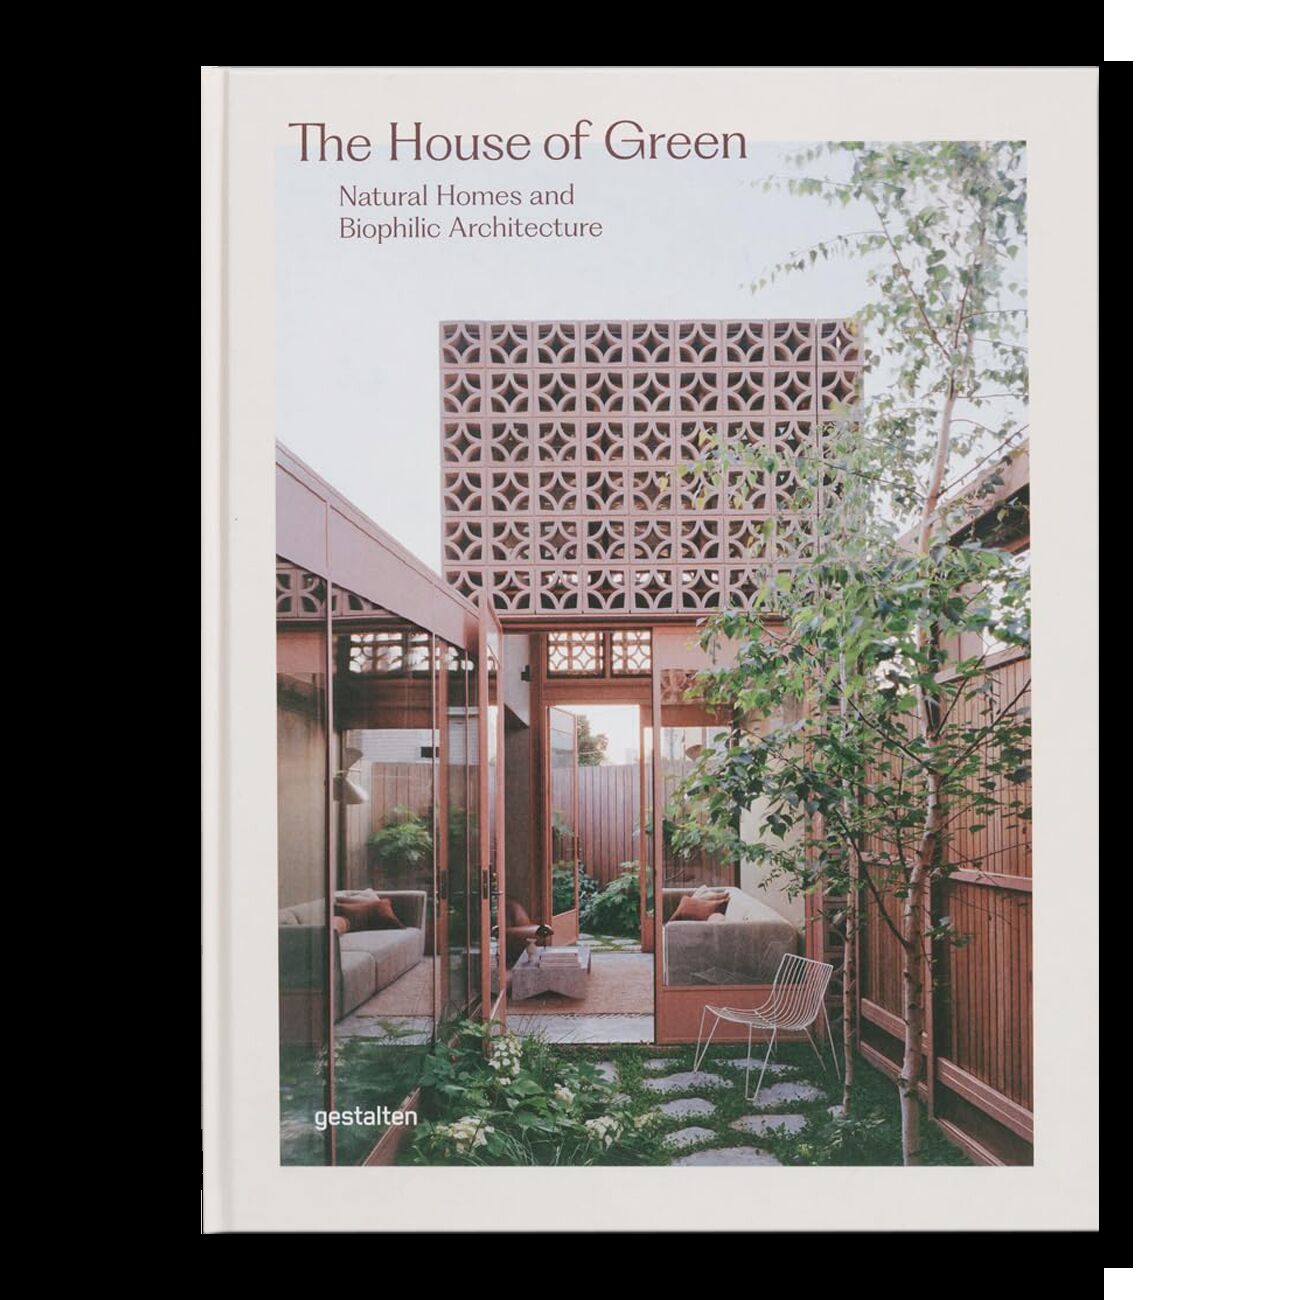 The House of Green